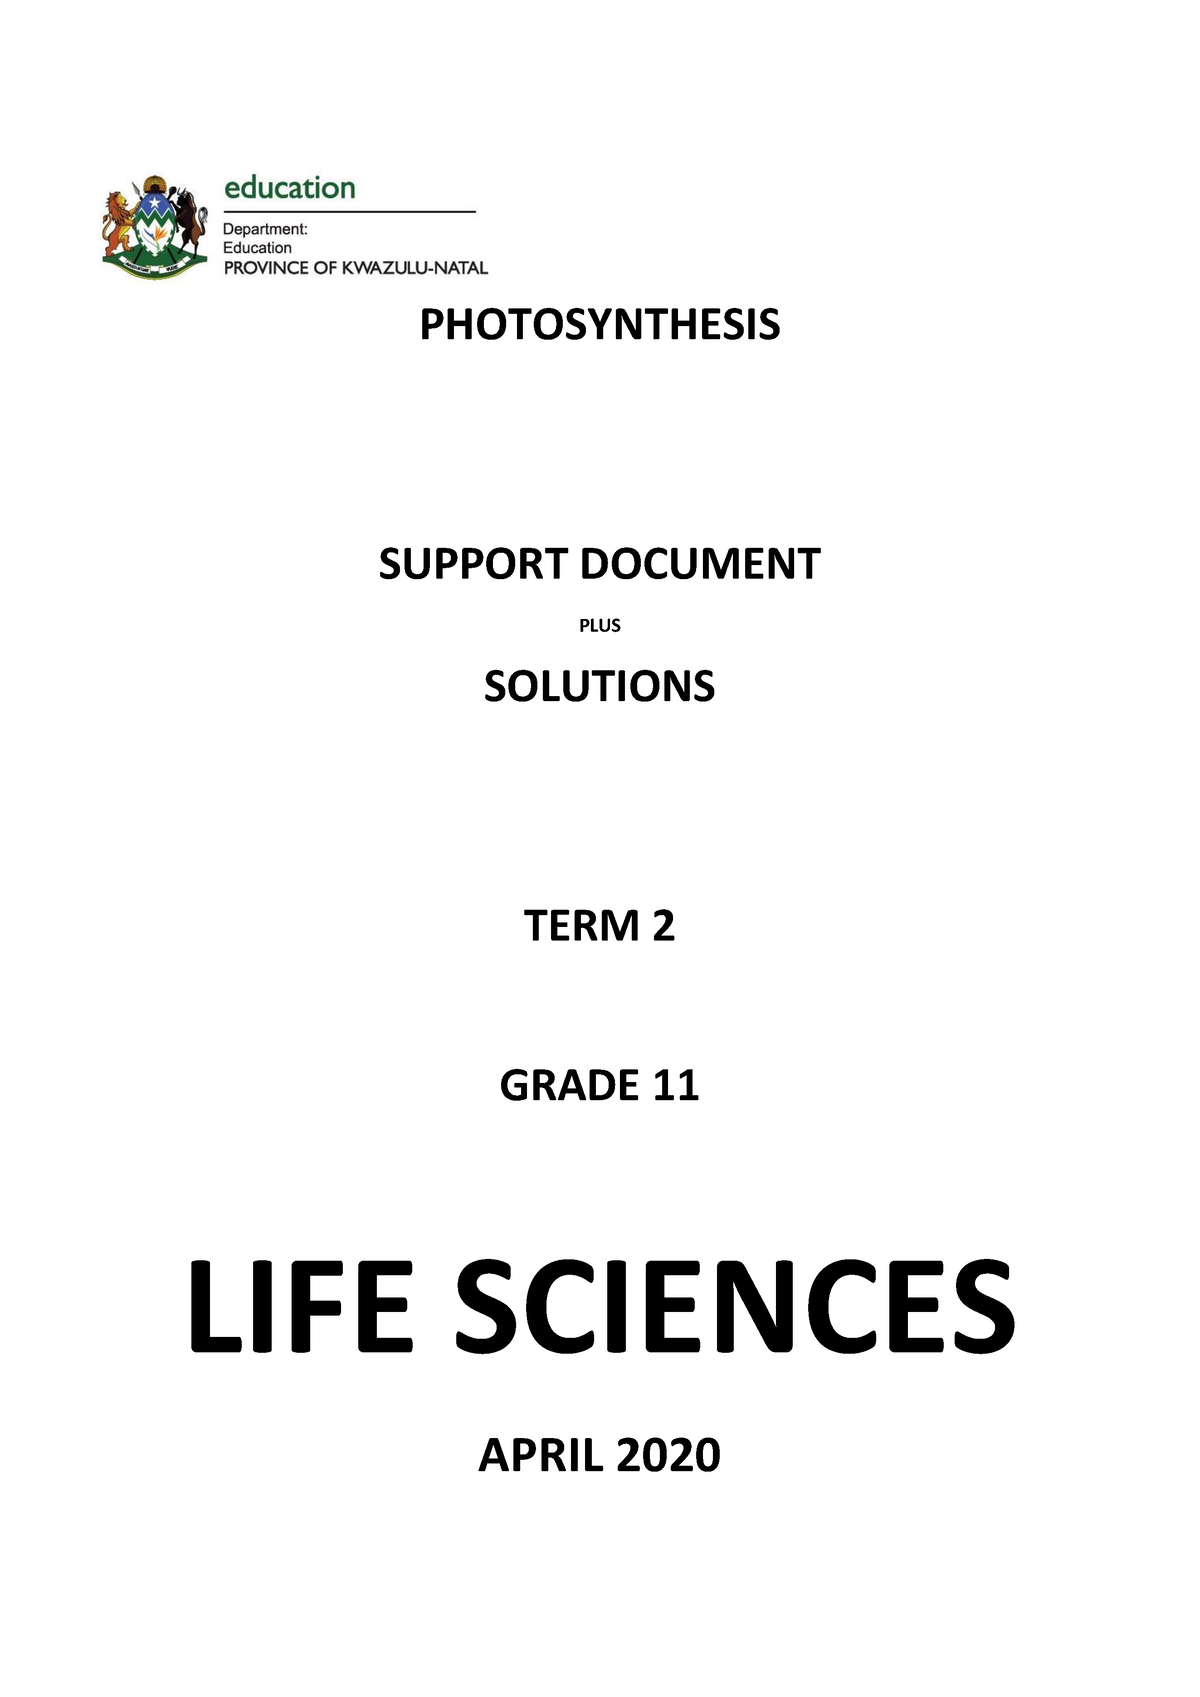 grade 11 life science assignment term 2 photosynthesis 2022